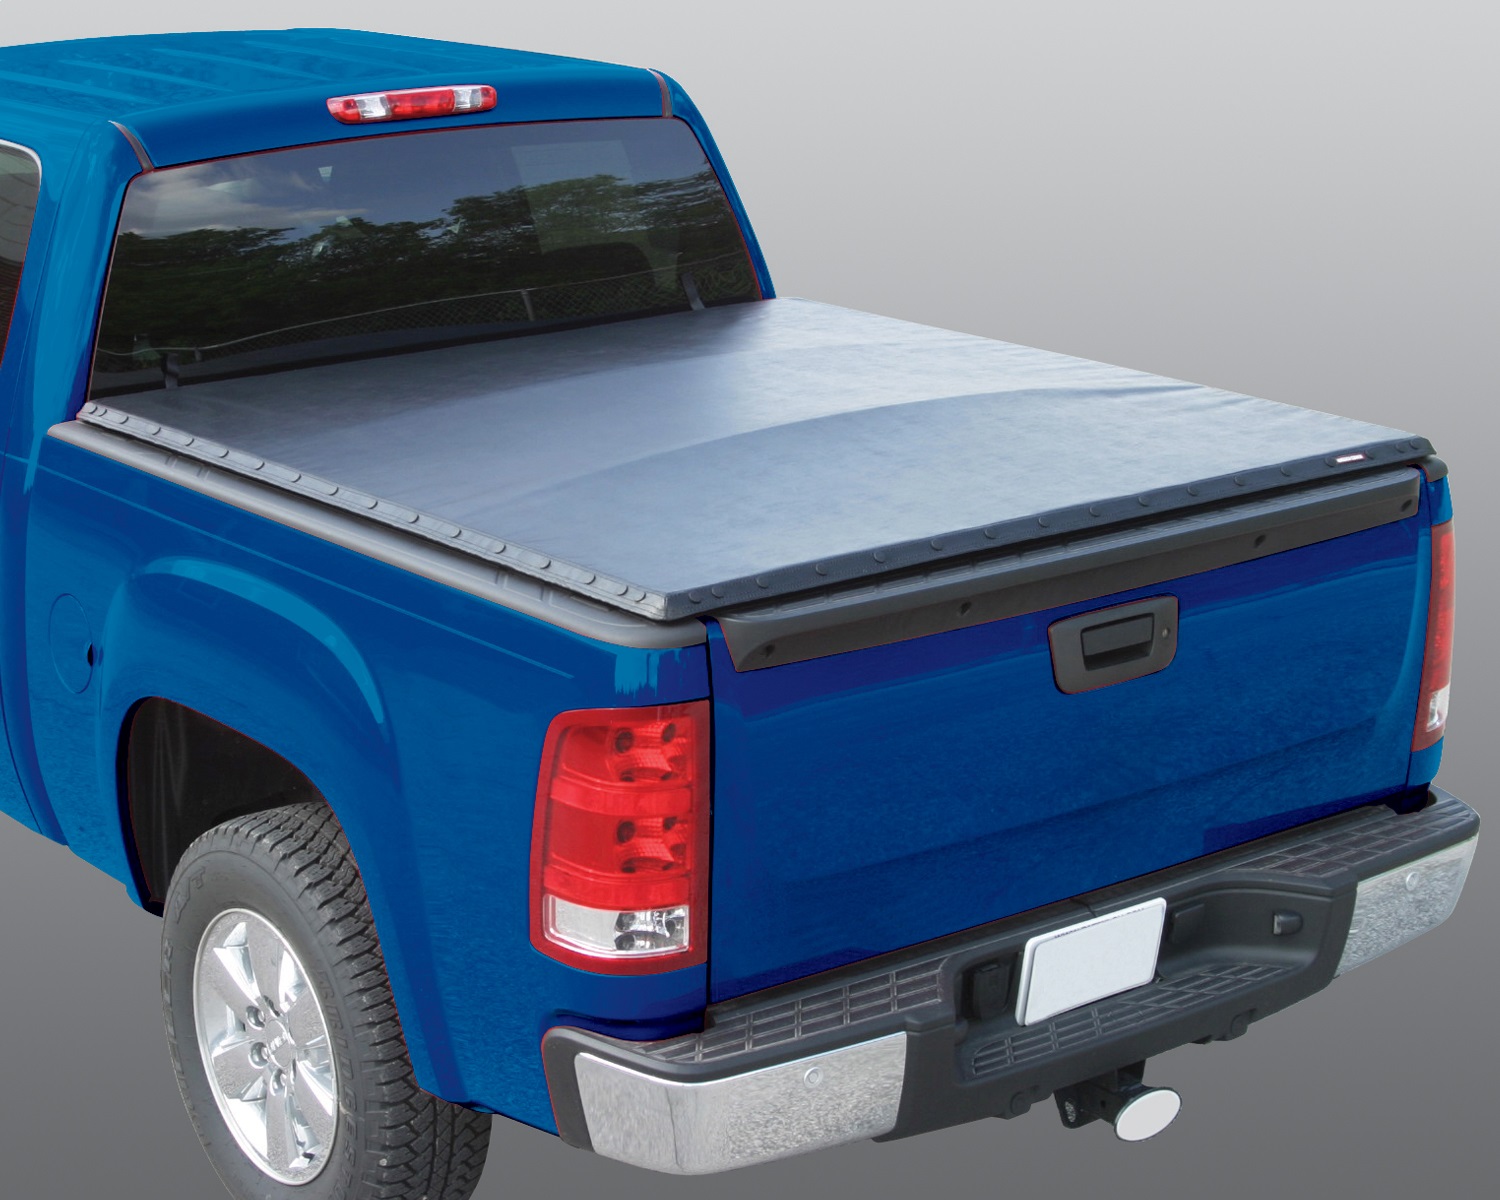 Rugged Liner Rugged Liner SN-F6504 Rugged Cover; Tonneau Cover Fits 04-08 F-150